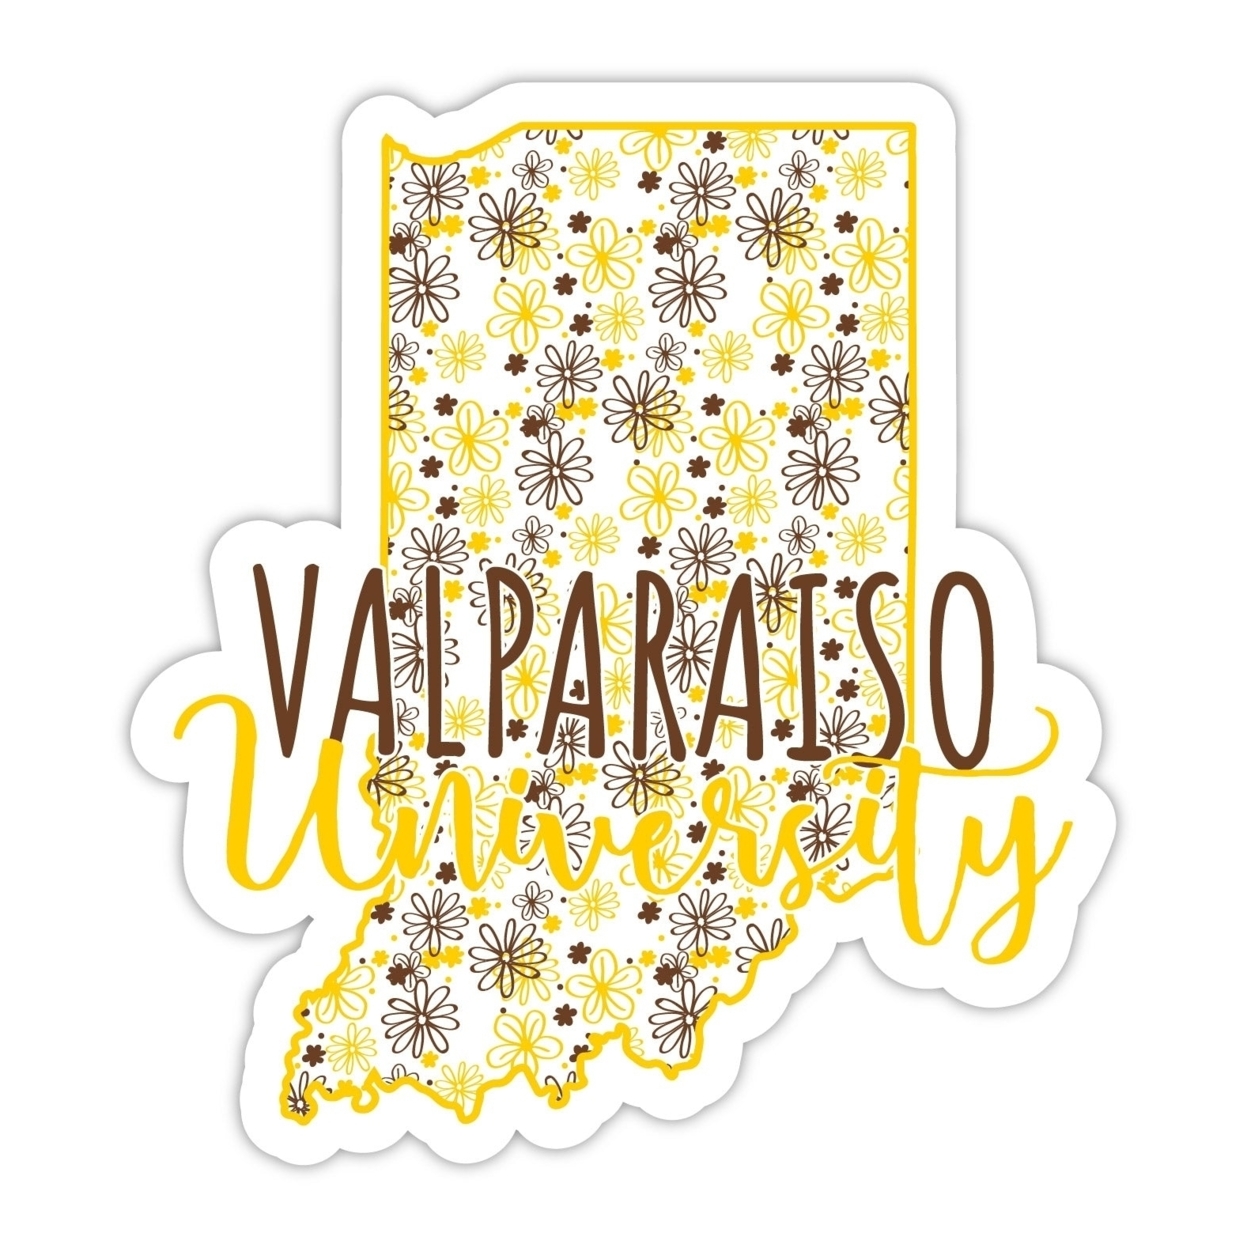 Valparaiso University Floral State Die Cut Decal 4-Inch